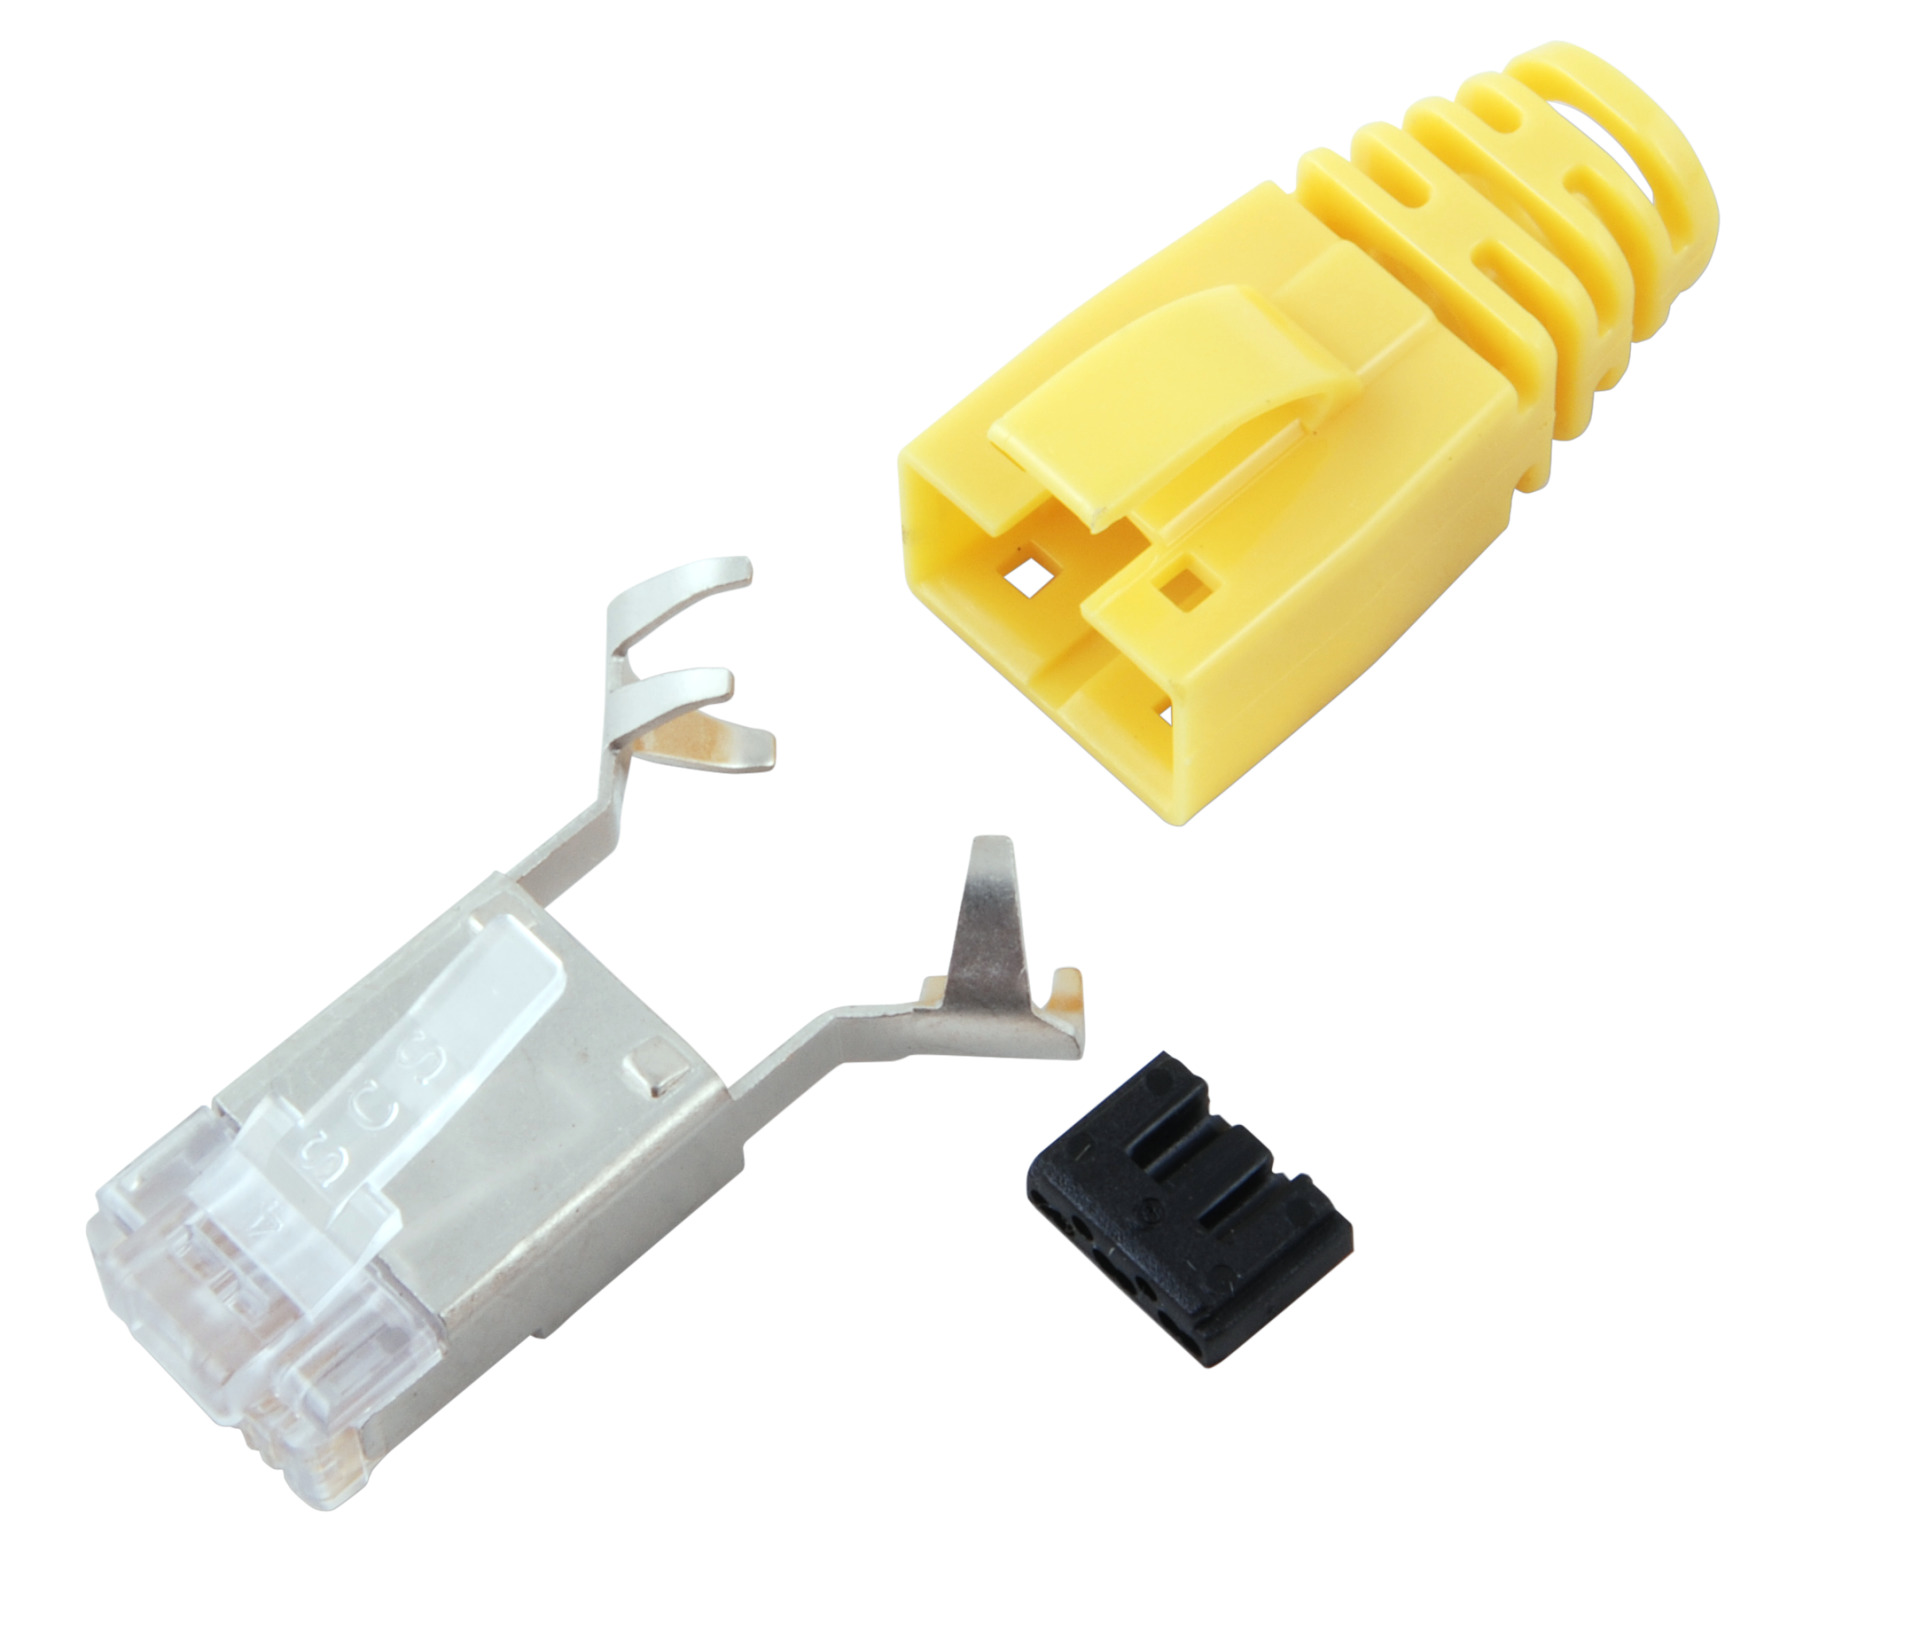 RJ45 Stewart Connector STP, SS39200-012 Cat.6, without anti-kink sleeve